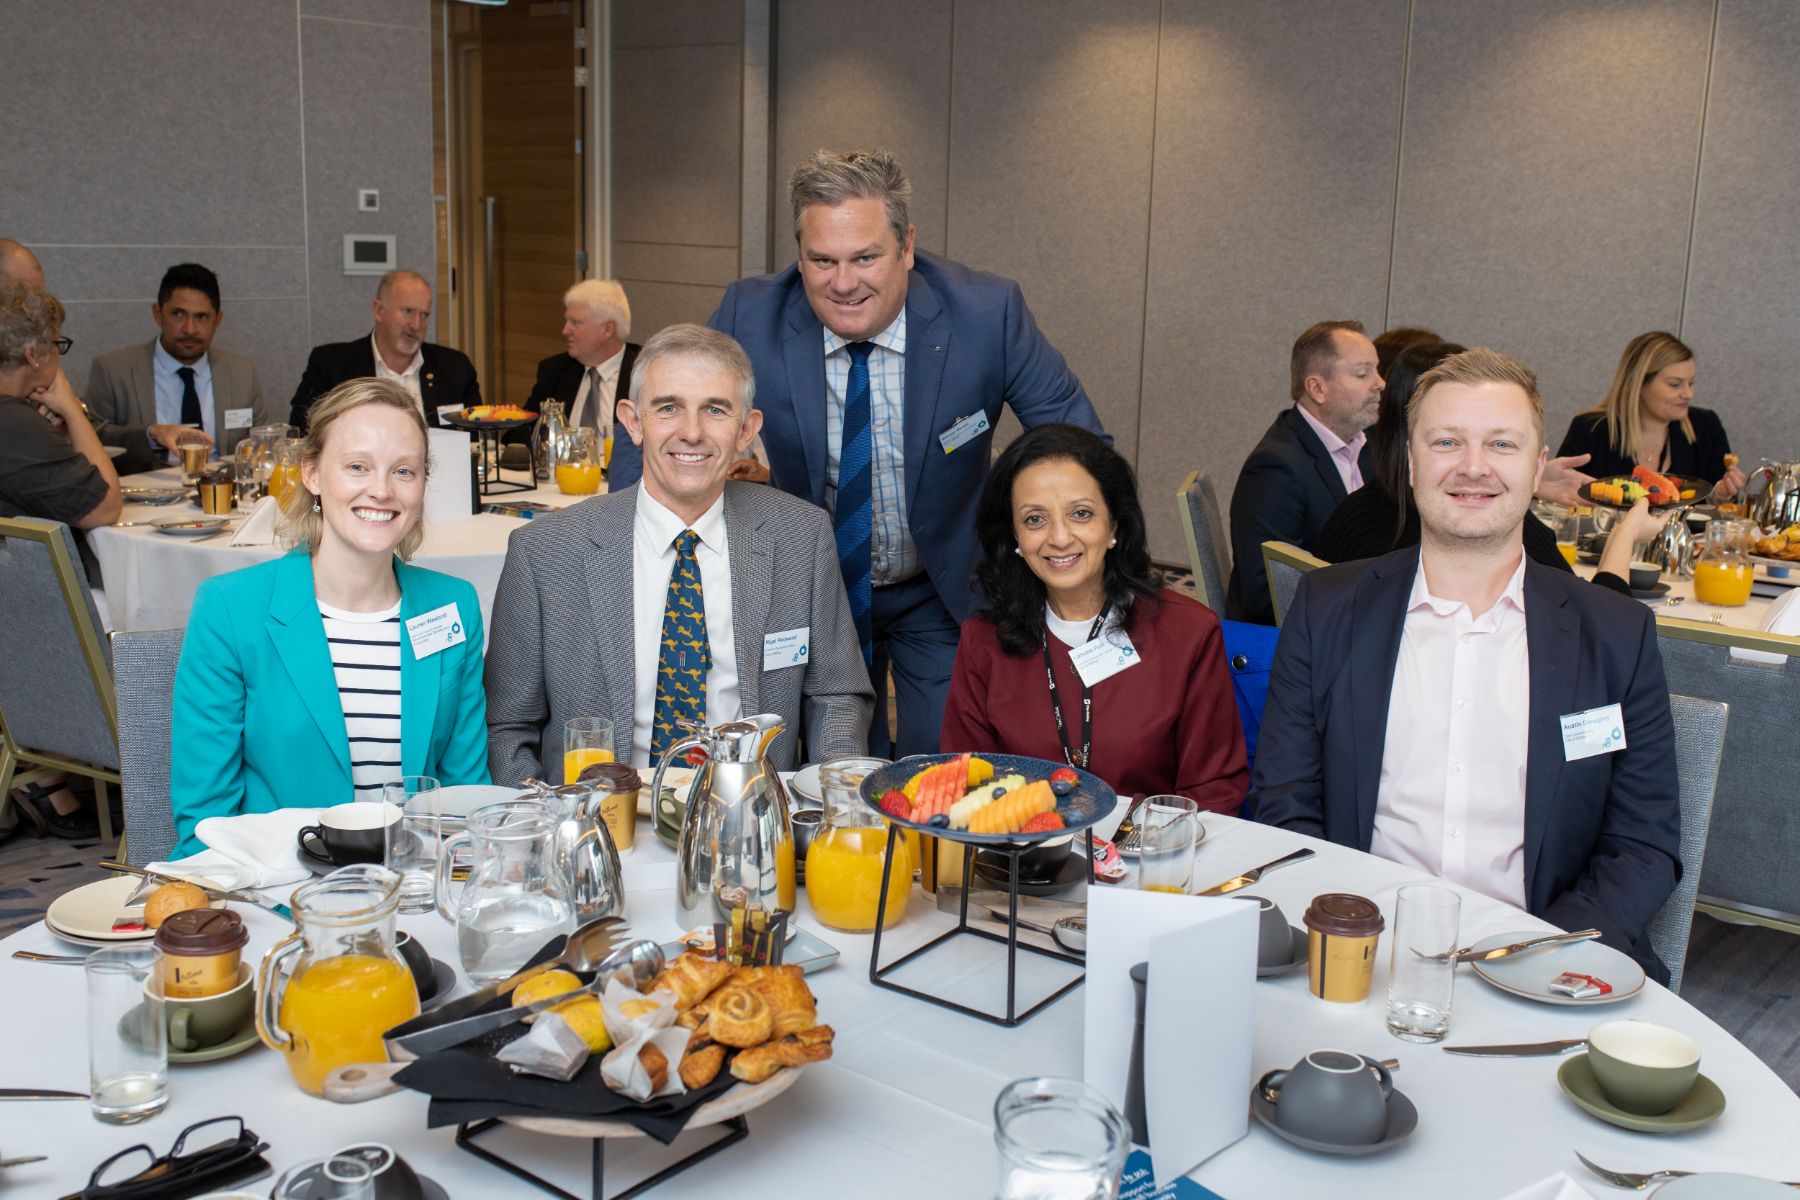 Photo of the SBDC’s Small Business Friendly Approvals Manager Lauren Westcott (L) with guests Nigel Redwood, Stevan Rodic, Renuka Puri and Austin Donaghey from the City of Stirling